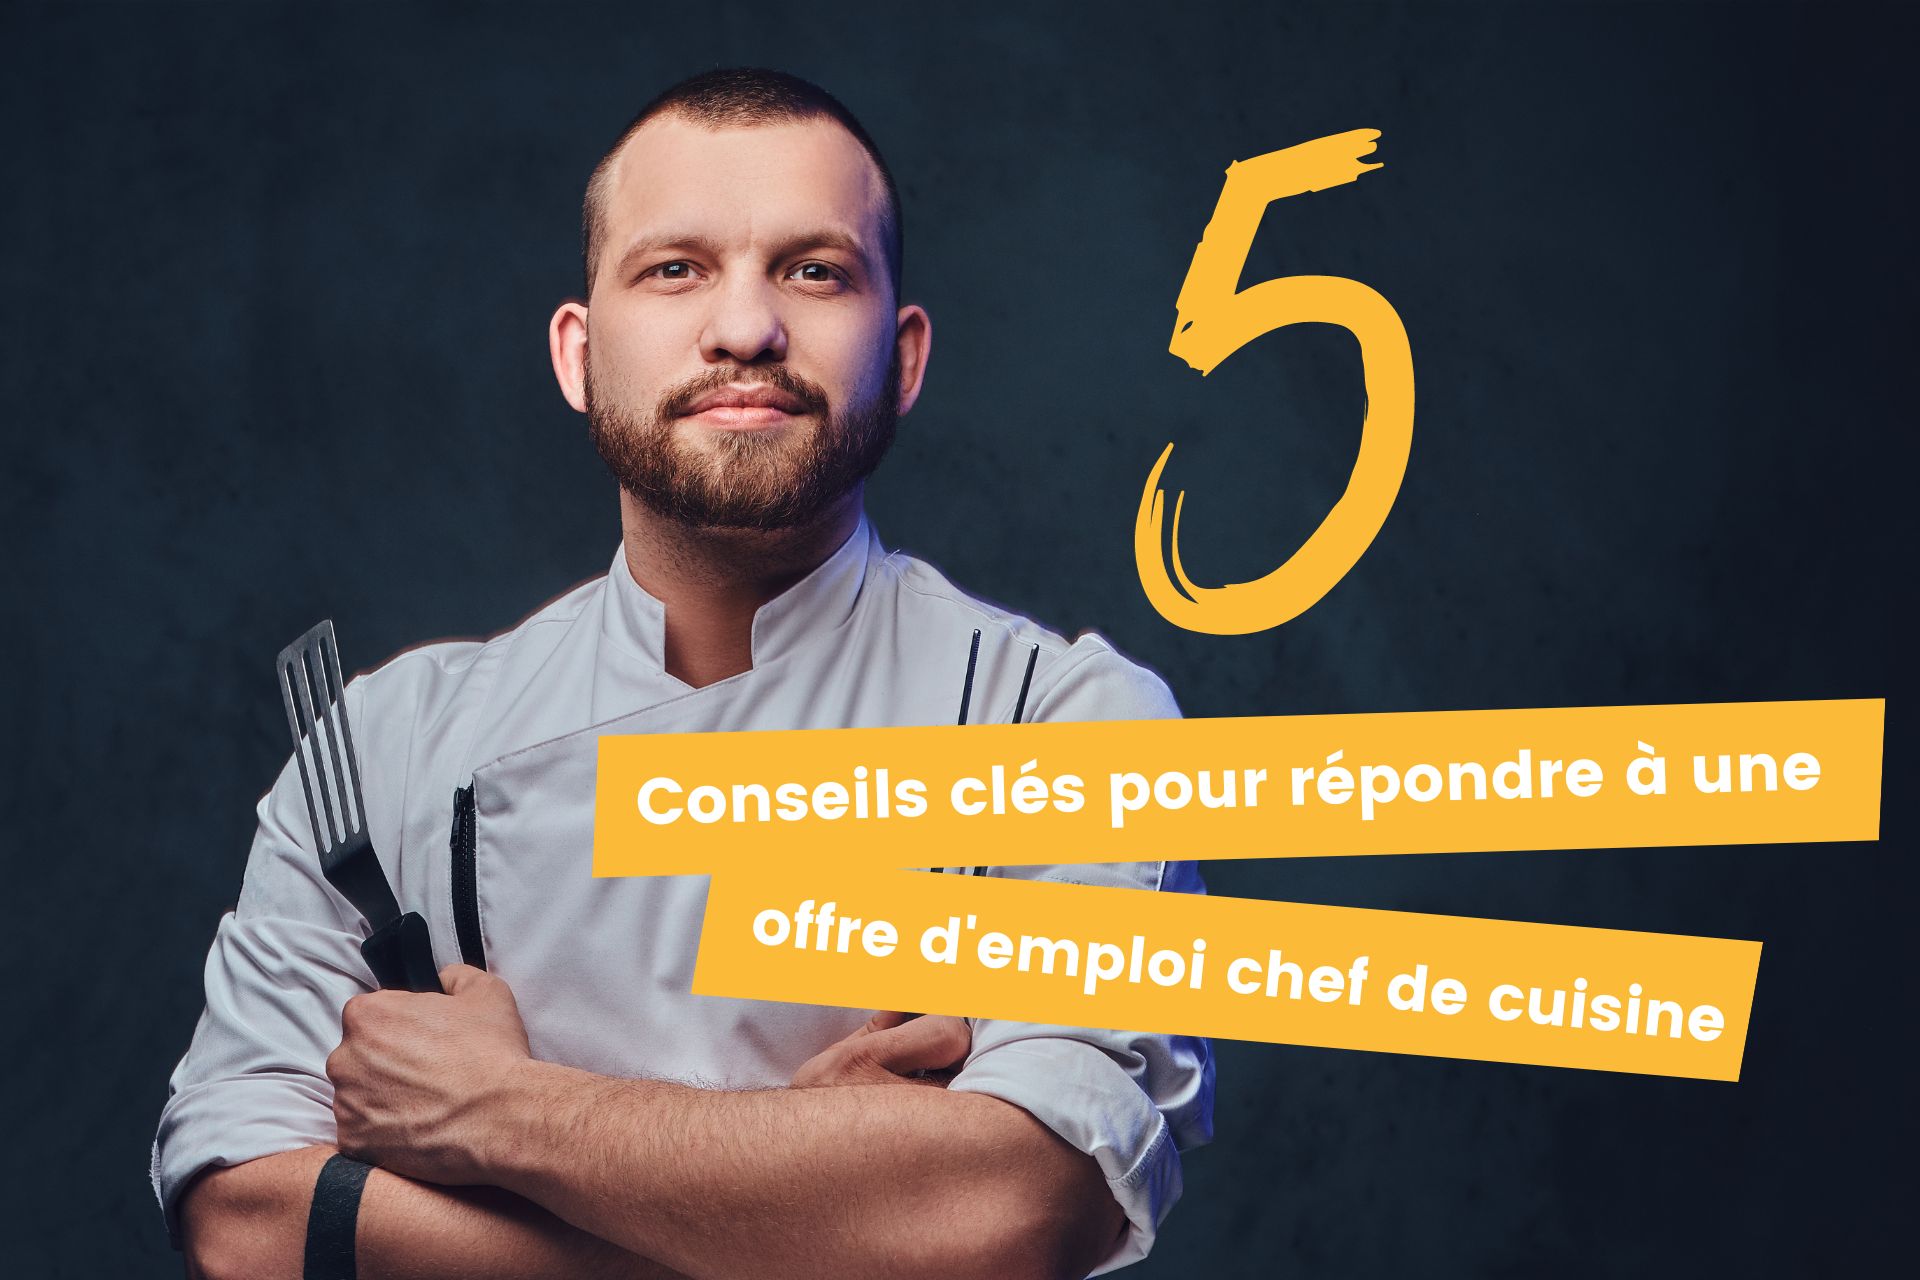 5 key tips for responding to a chef job offer